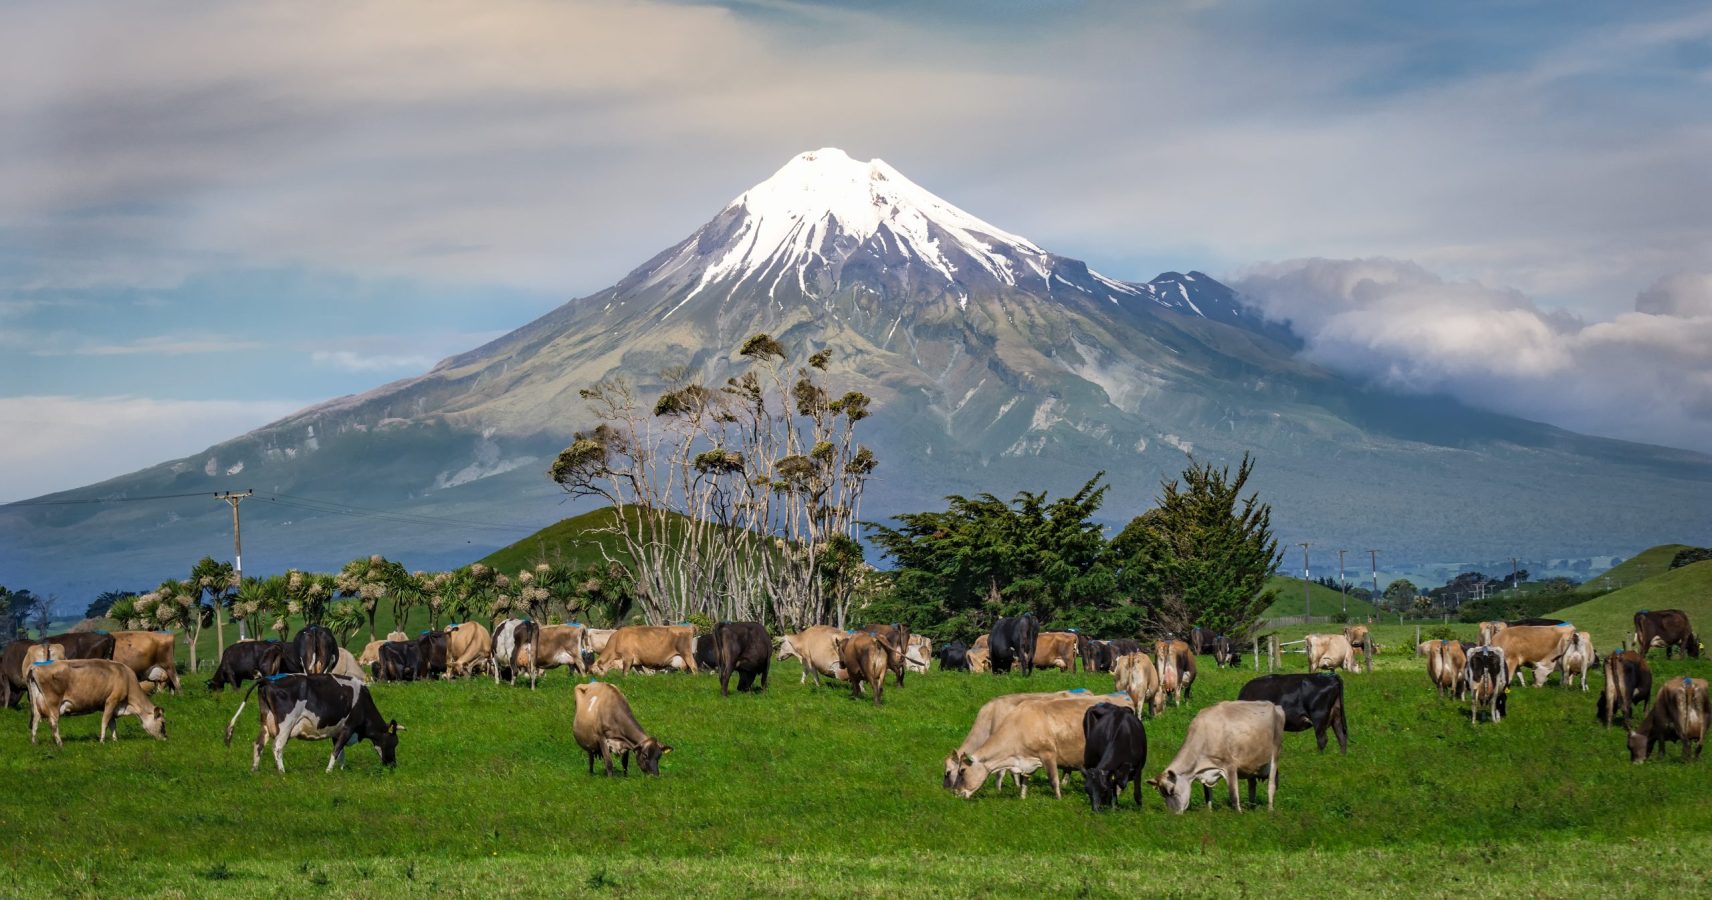 Mt Taranaki with cows in foreground. New Zealand